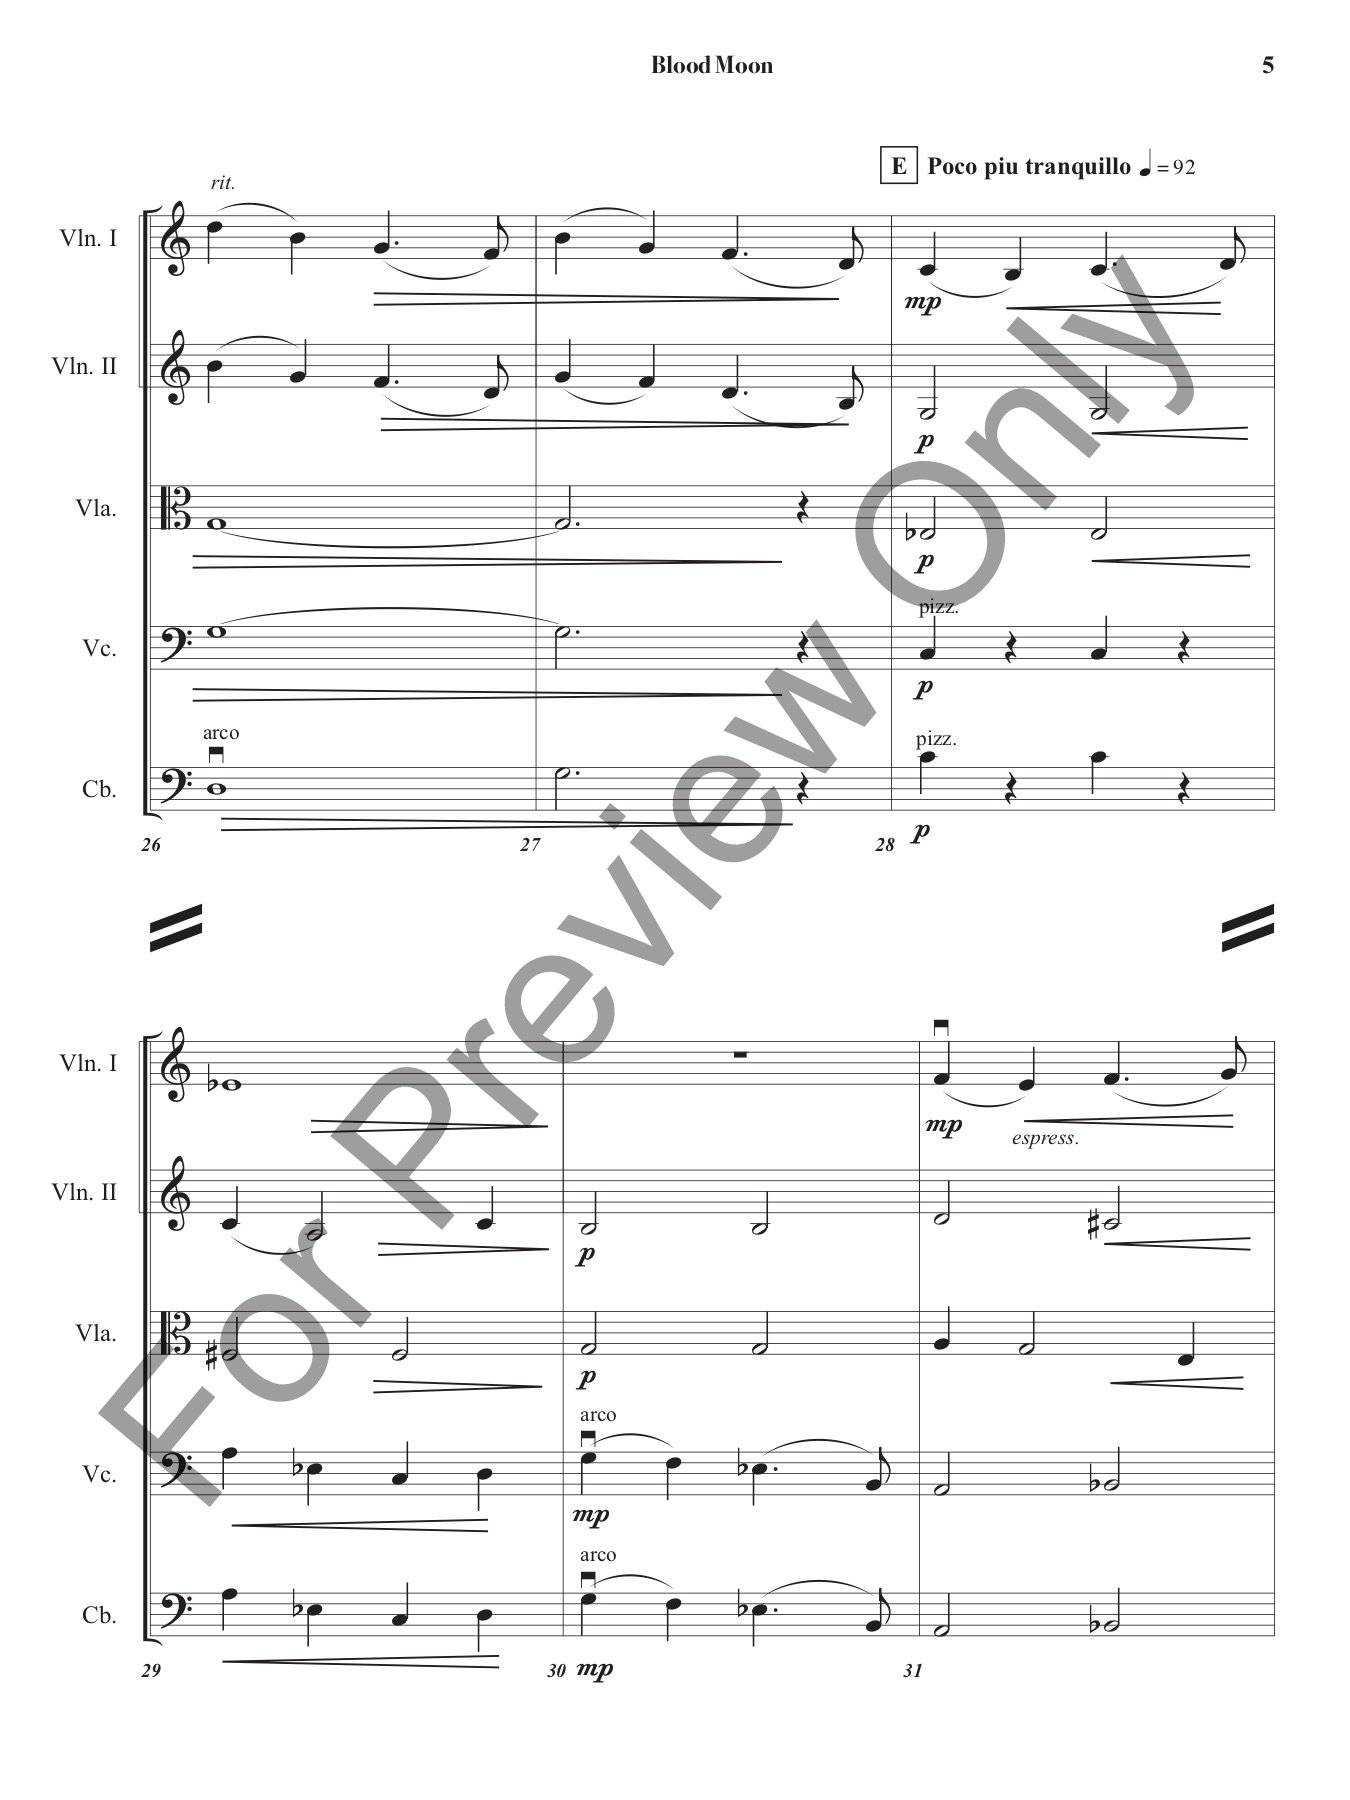 Blood Moon for String Orchestra - Cover Page and Full Score Only (for Preview Only p7).jpg